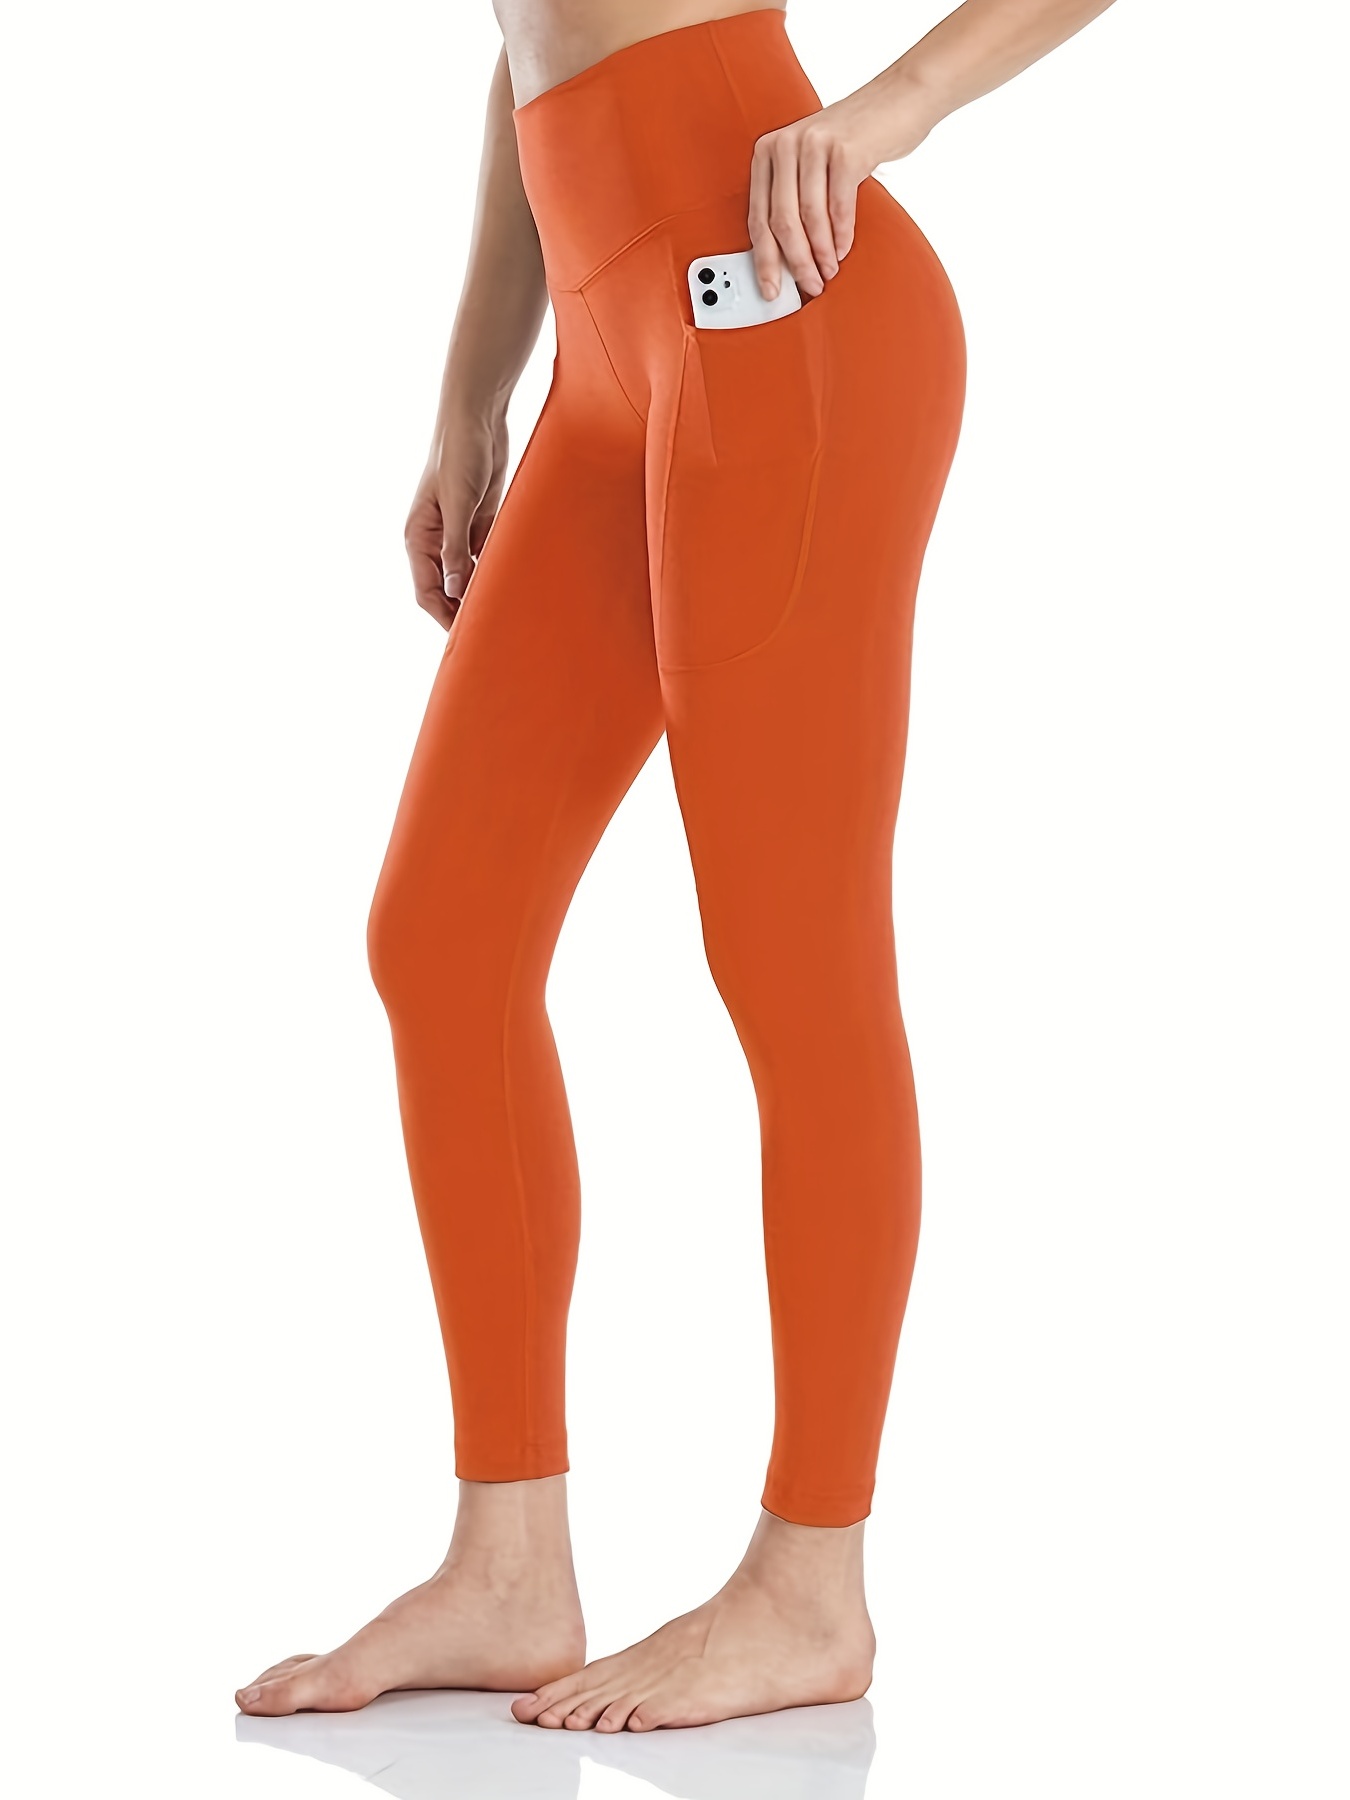 High Waist Yoga Pants with Pockets, Tummy Control Workout Running